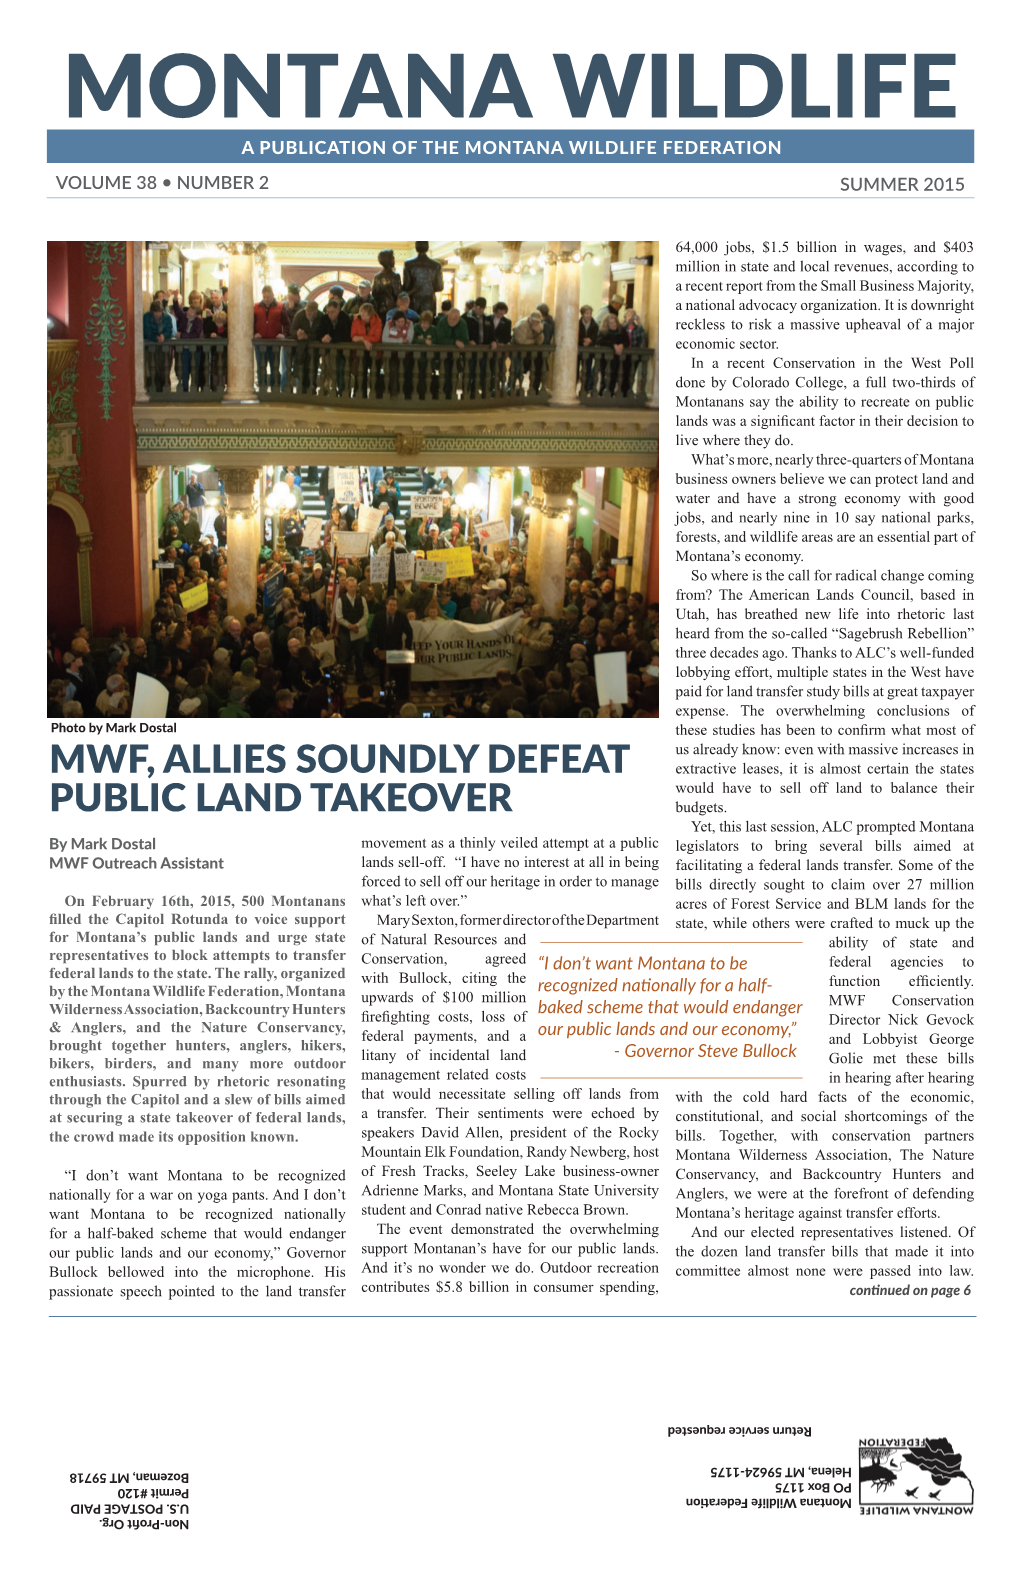 Mwf, Allies Soundly Defeat Public Land Takeover